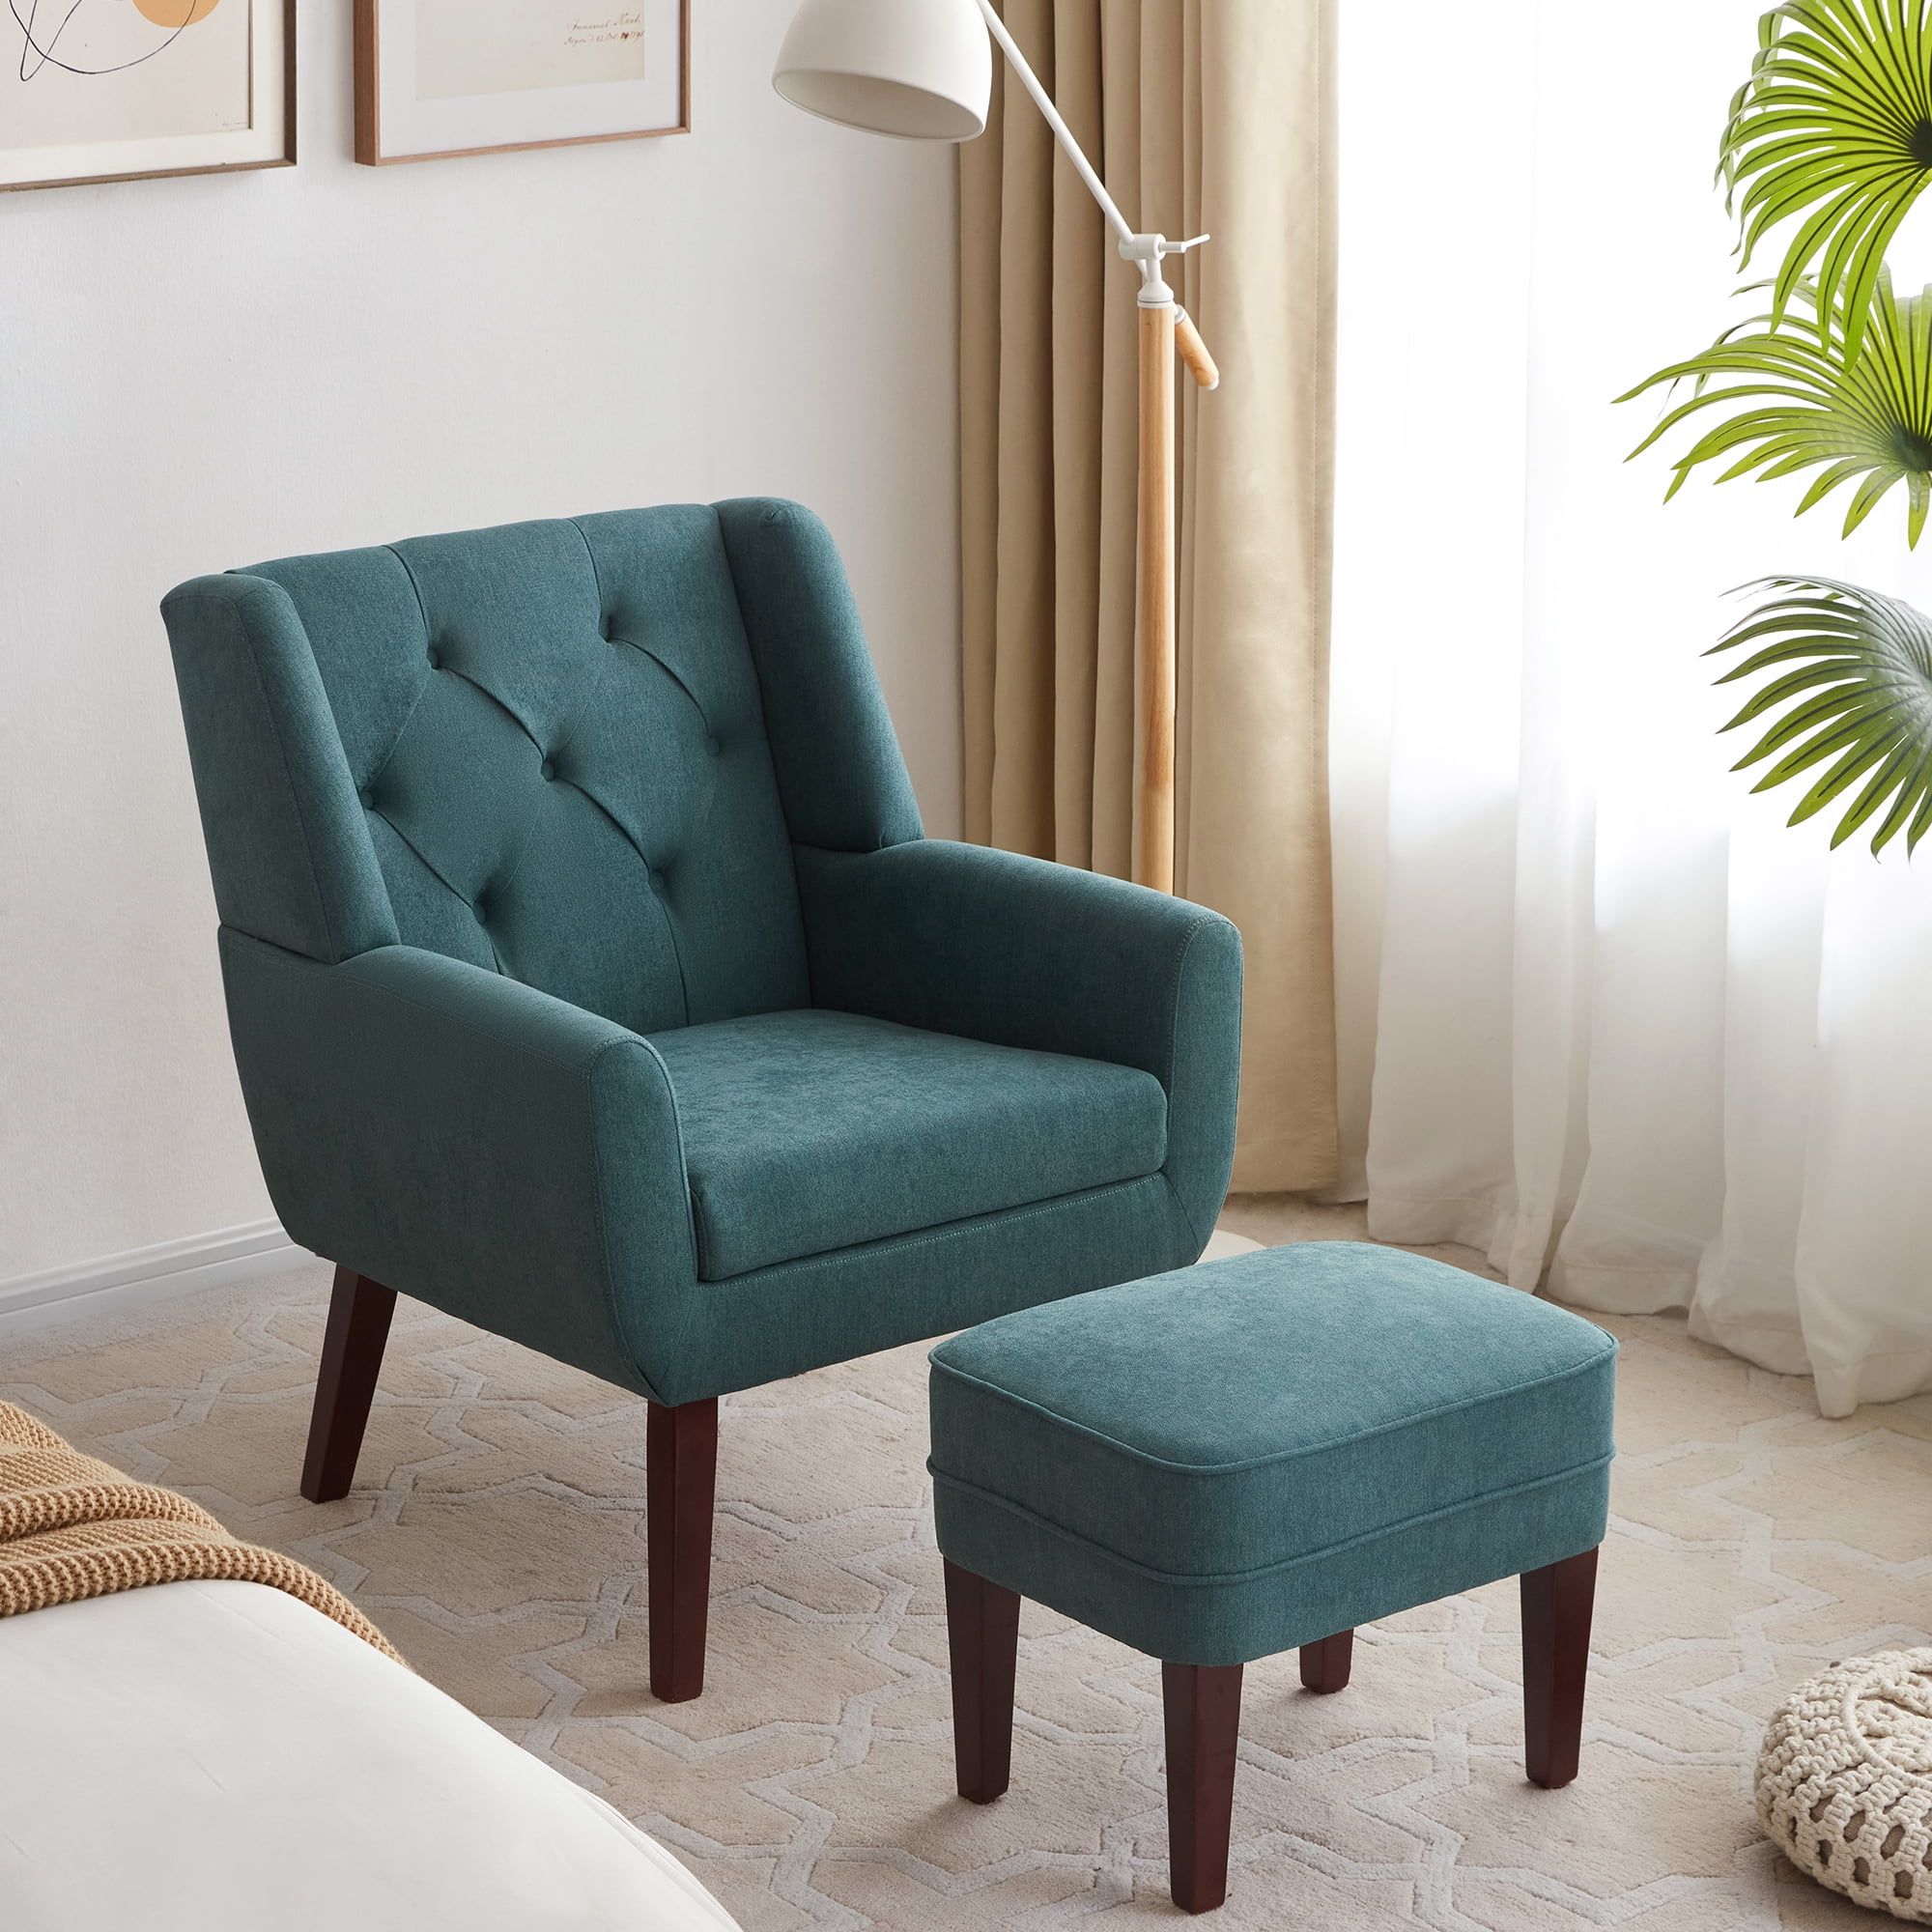 Huimo Accent Chair With Ottoman,mid Century Modern Upholstered Button  Tufted Armchair, Linen Fabric Sofa Comfy Reading Chairs For Living Room,  Bedroom,reception Room(dark Teal) – Walmart For Comfy Reading Armchairs (View 15 of 15)